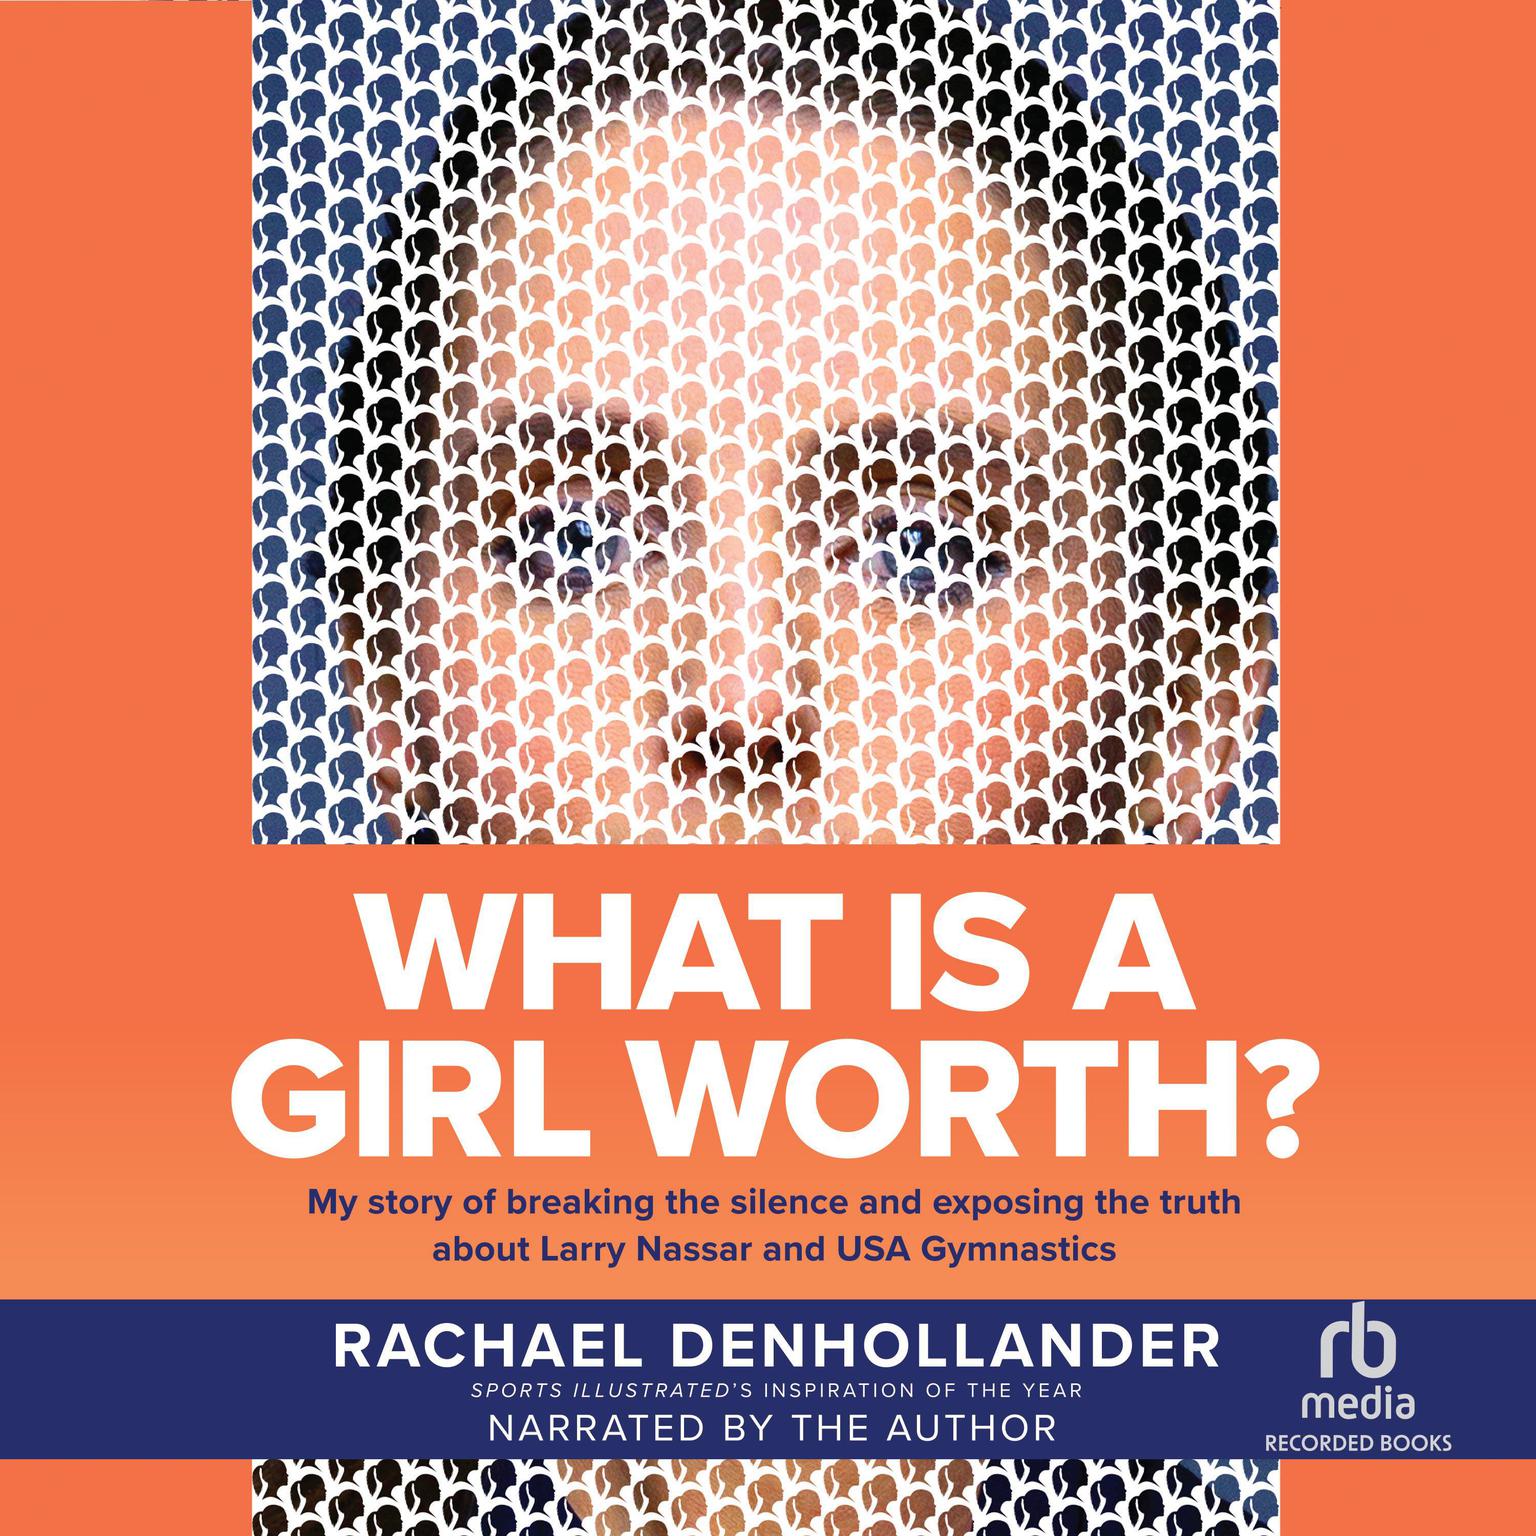 What is A Girl Worth?: My Story Of Breaking The Silence and Exposing The Truth About Larry Nassar and USA Gymnastics Audiobook, by Rachael Denhollander